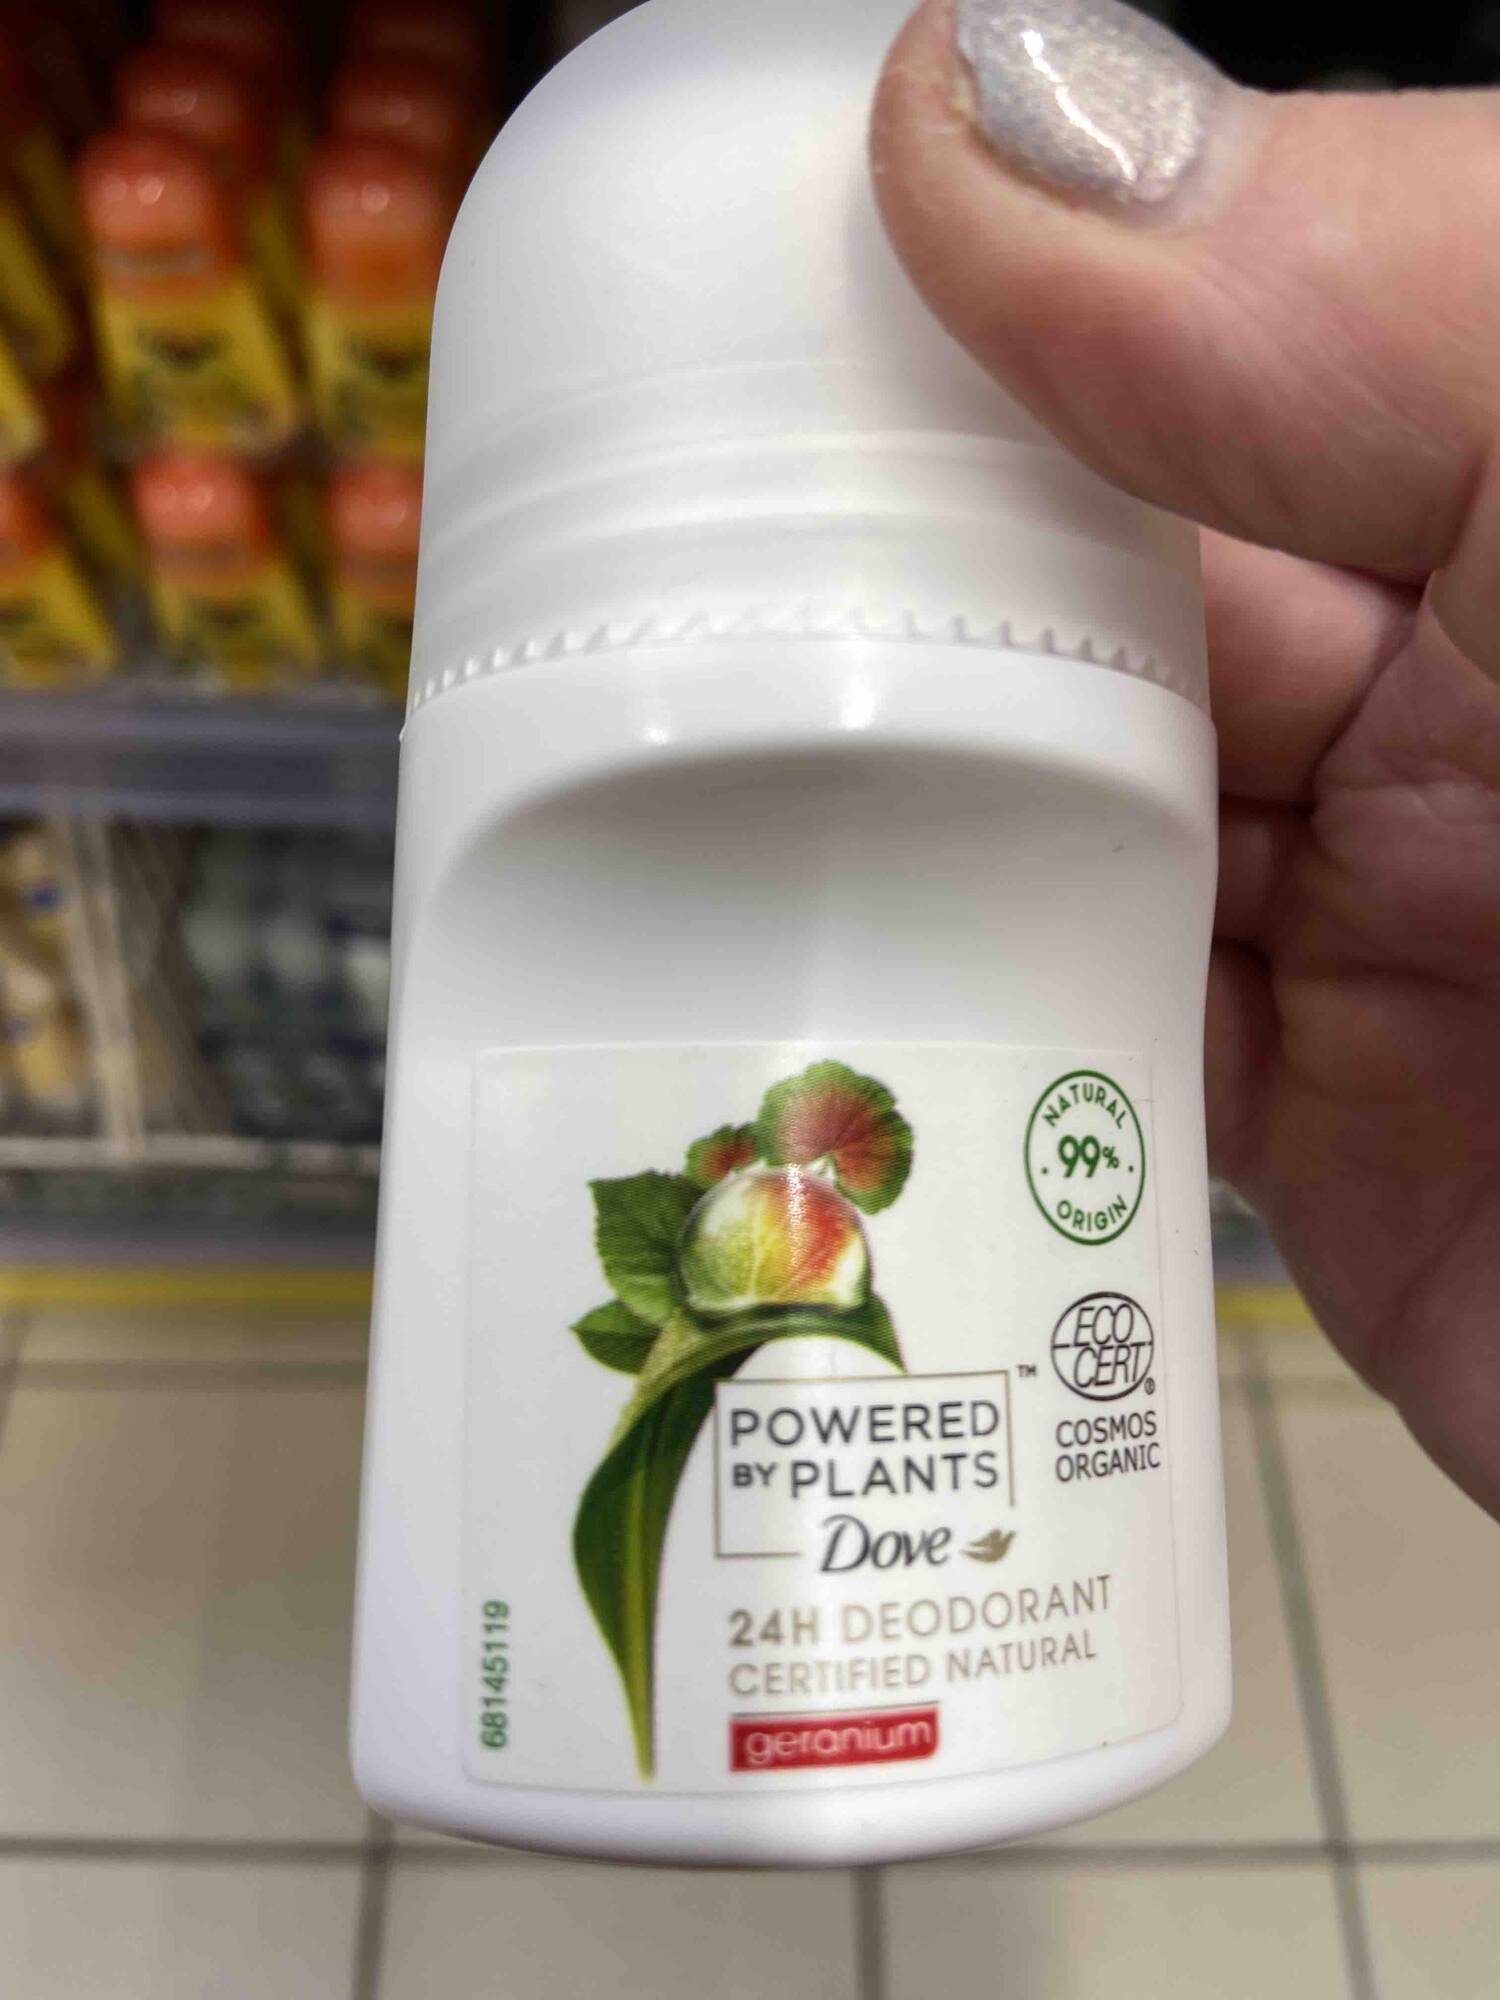 DOVE - Powered by plants - 24h deodorant